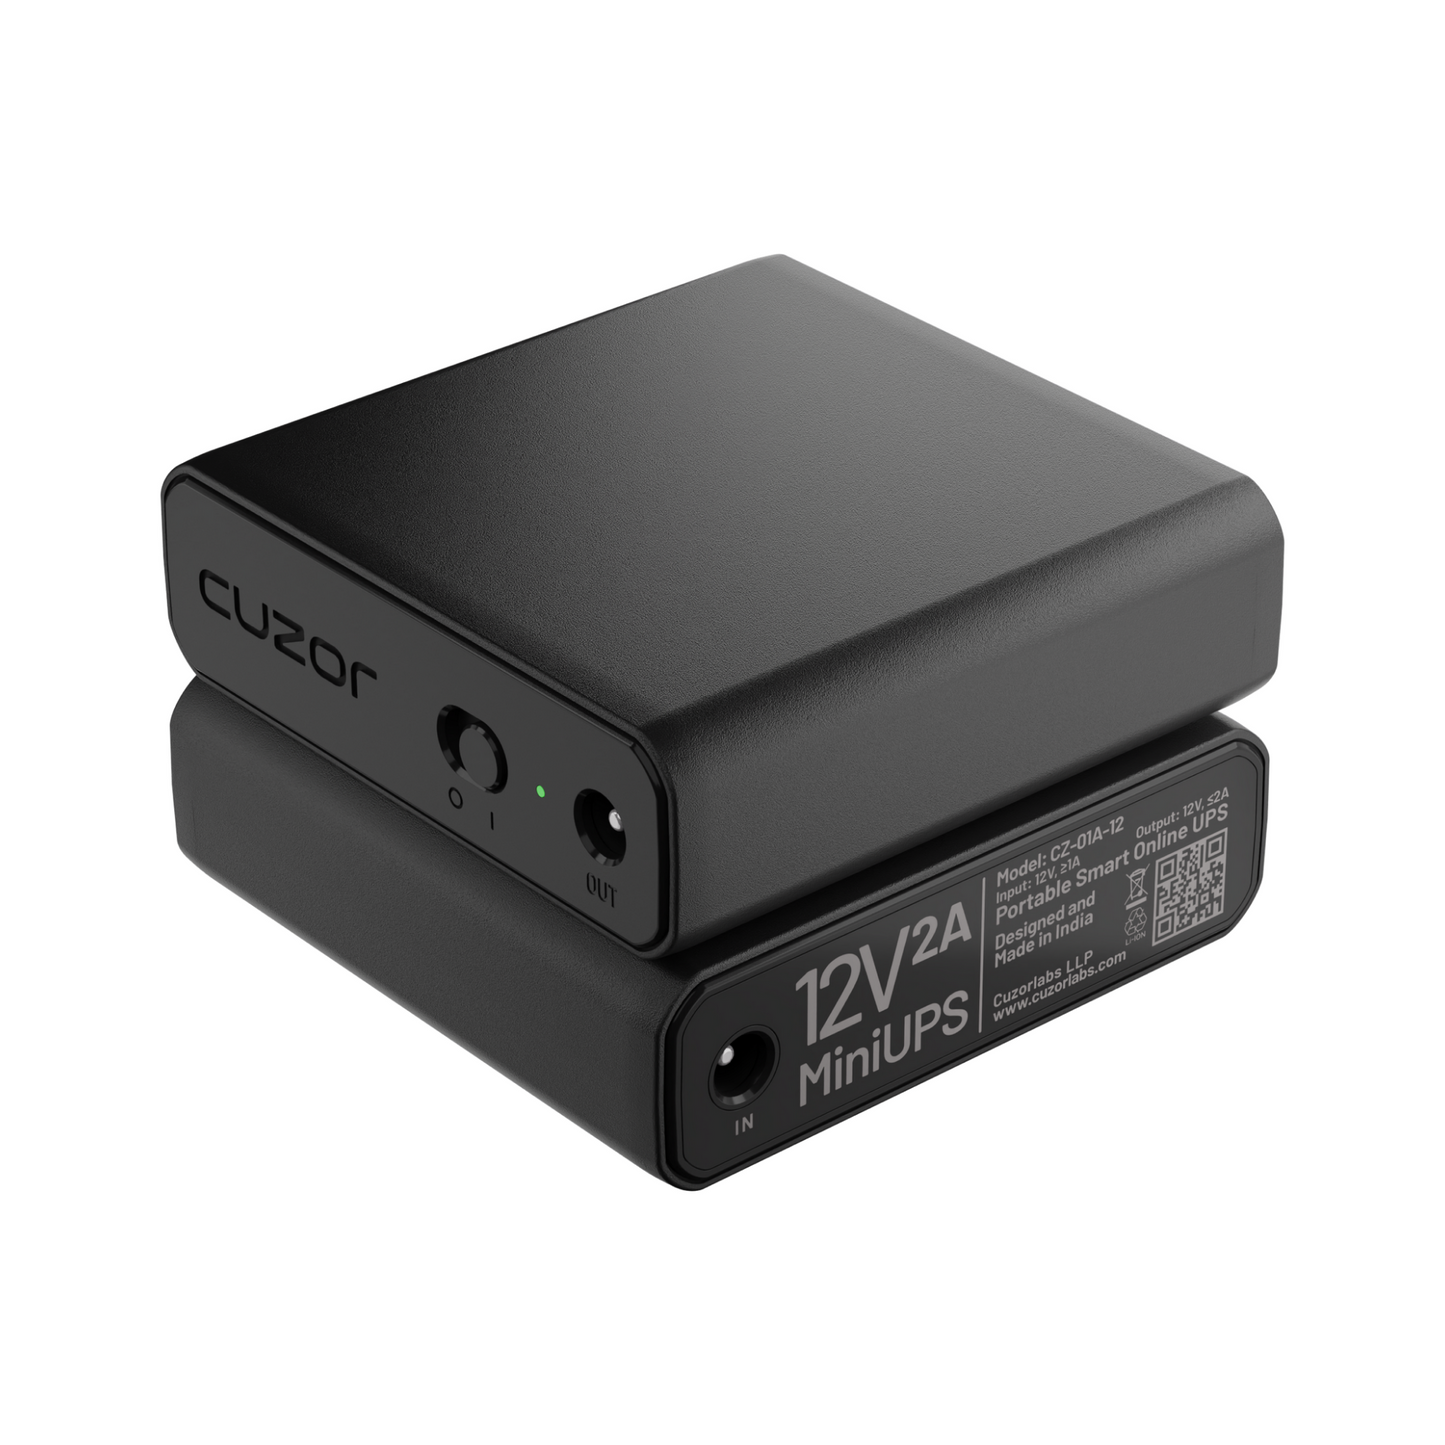 Cuzor Mini Router UPS for 12V up to 2Amp Routers | Up to 5 Hours Backup | 2x2900 mAh batteries